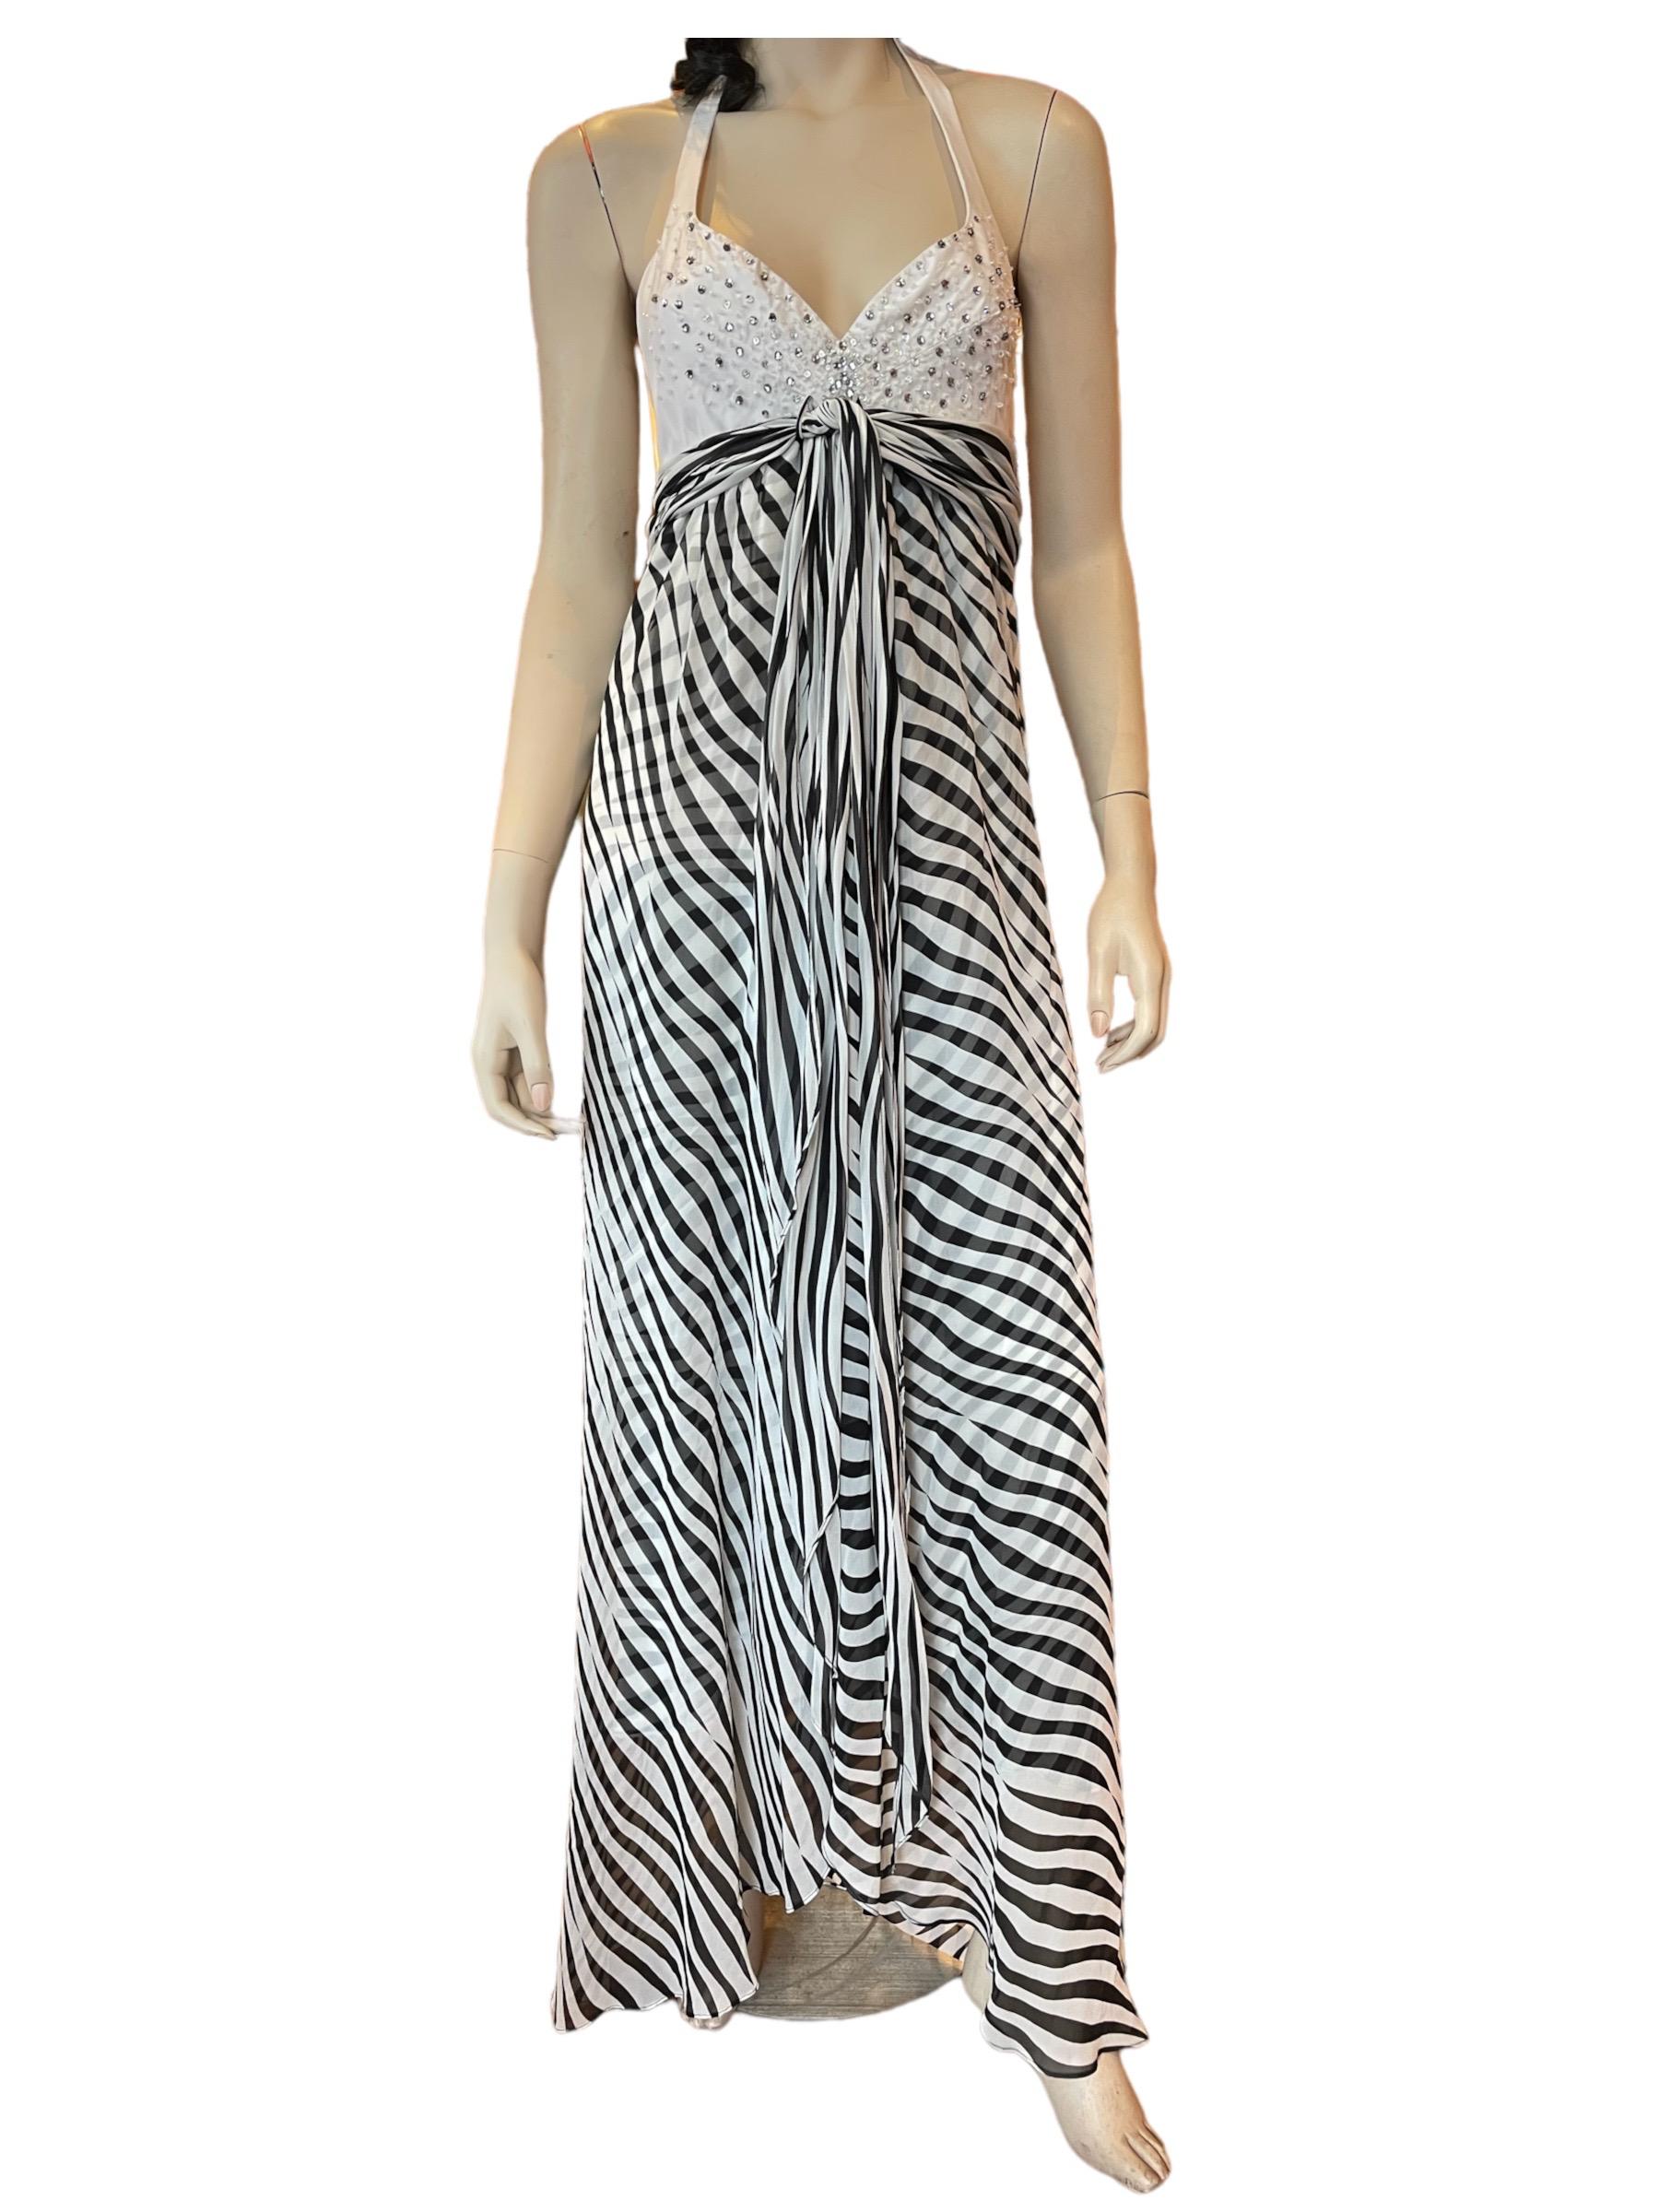 Stephen Burrows Zebra Print Silk Chiffon Maxi Halter Dress with Bejeweled Bust

Labeled Size 6
Bust: 32”
Waist: 30” 
Length: 62”

Stephen Burrows is an American fashion designer based in New York City, known for being one of the first